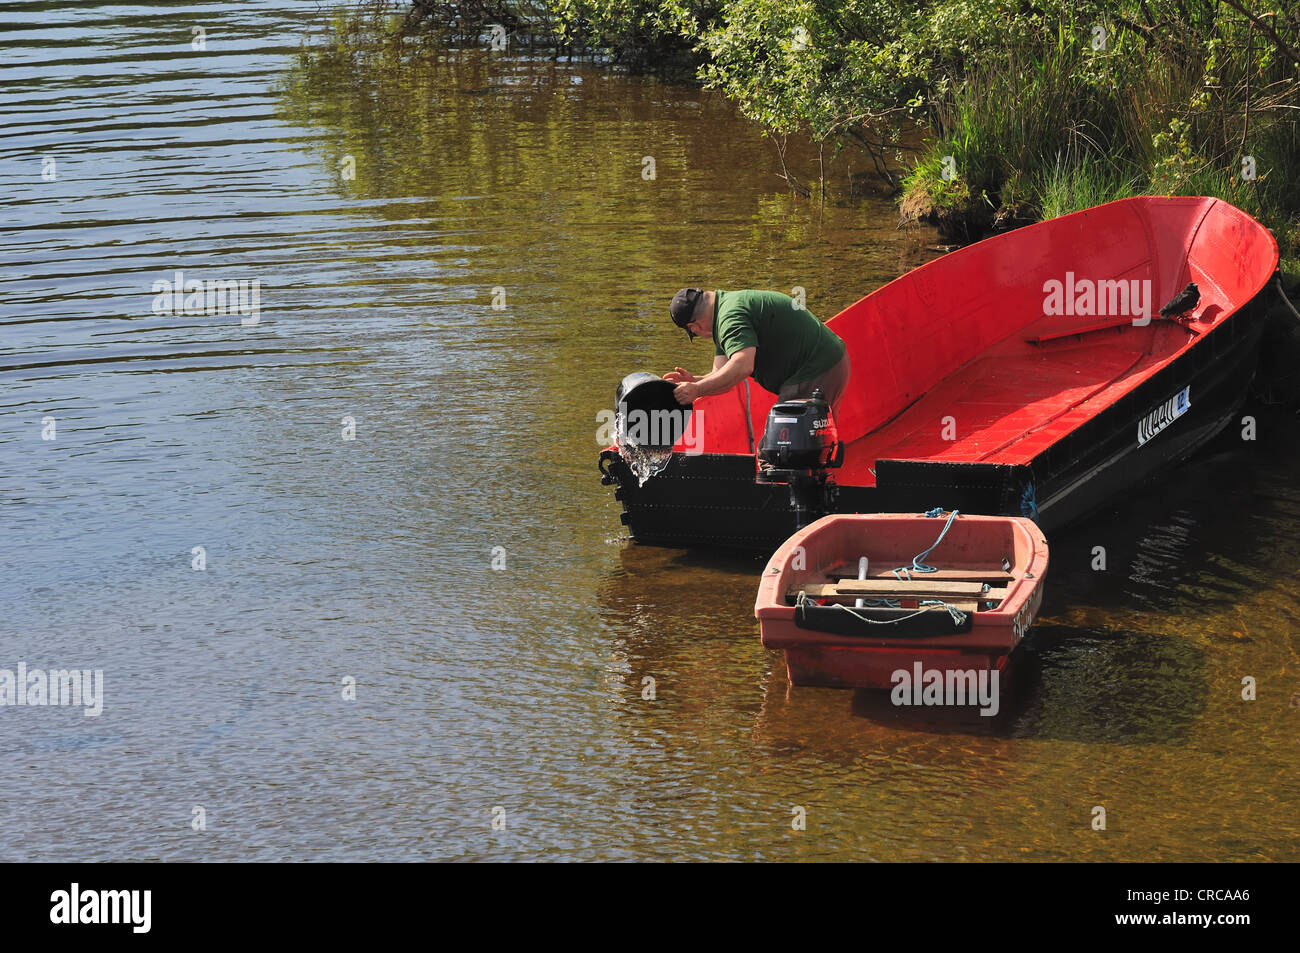 A man bails out a water filled boat after heavy rains over the river Leven in Scotland Stock Photo